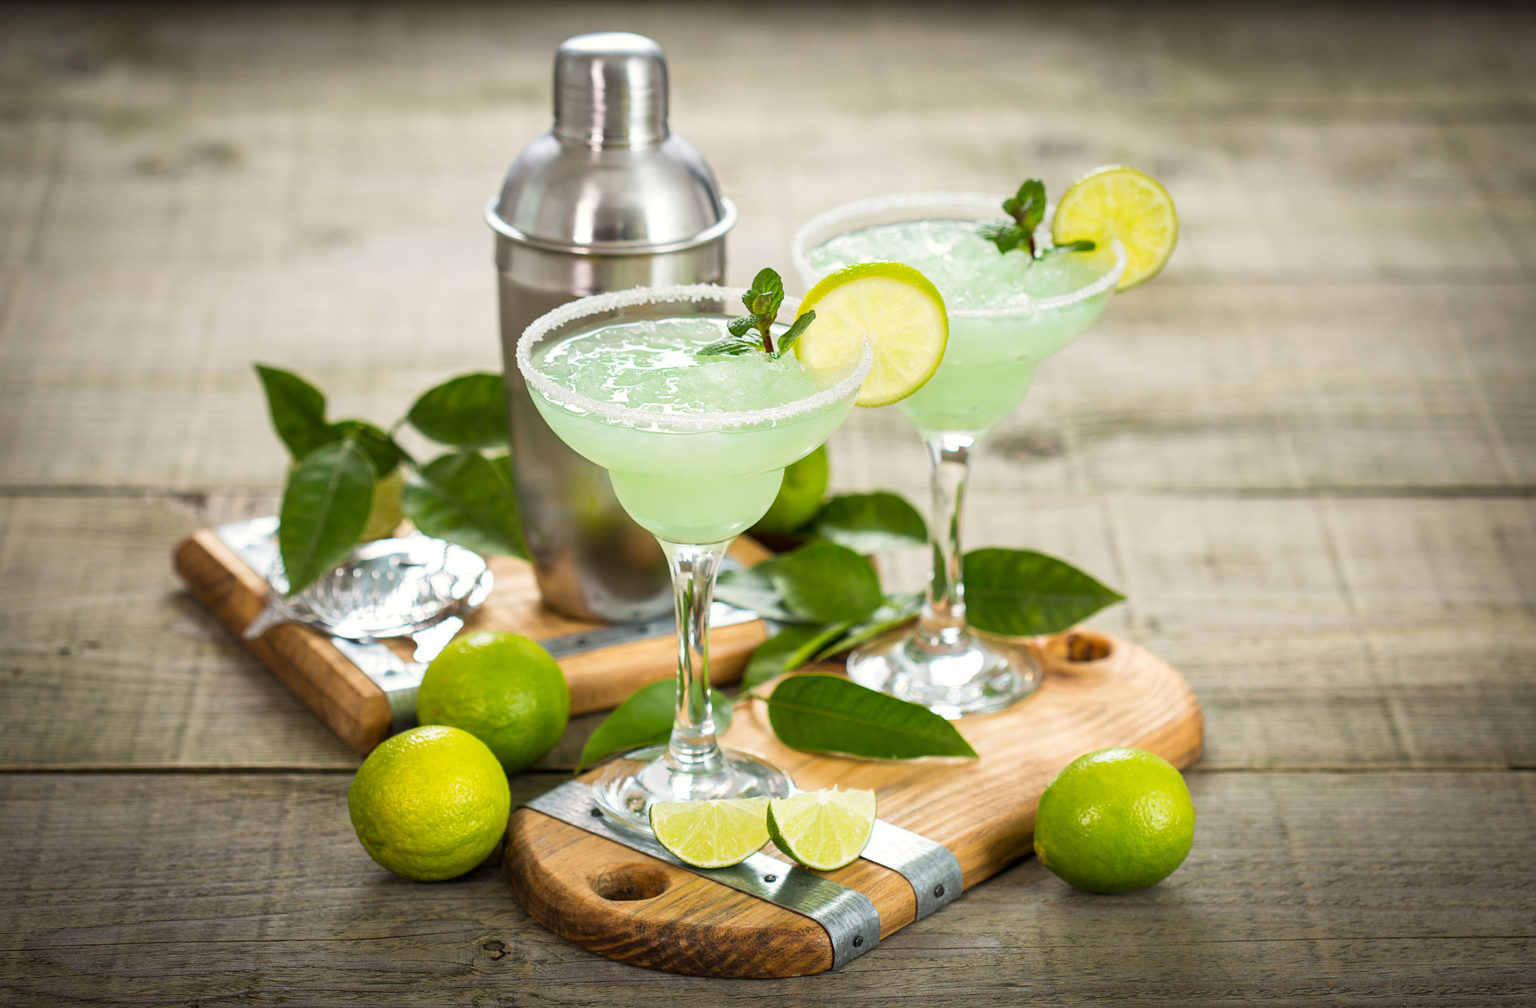 Today Feb. 22 is National Margarita Day! News Without Politics